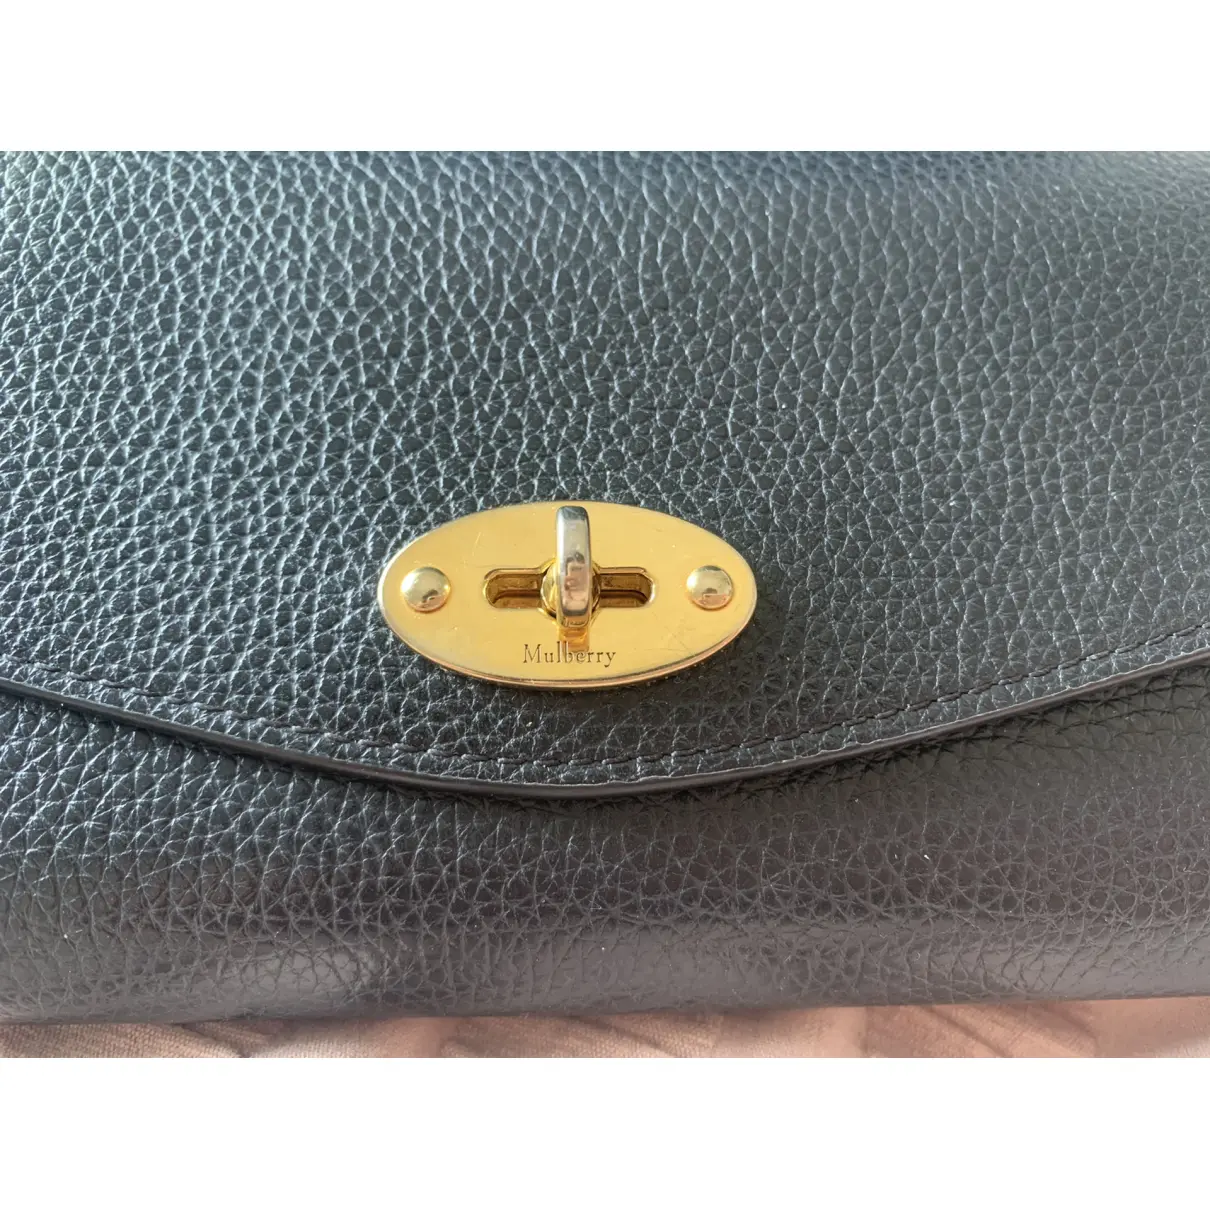 Buy Mulberry Leather purse online